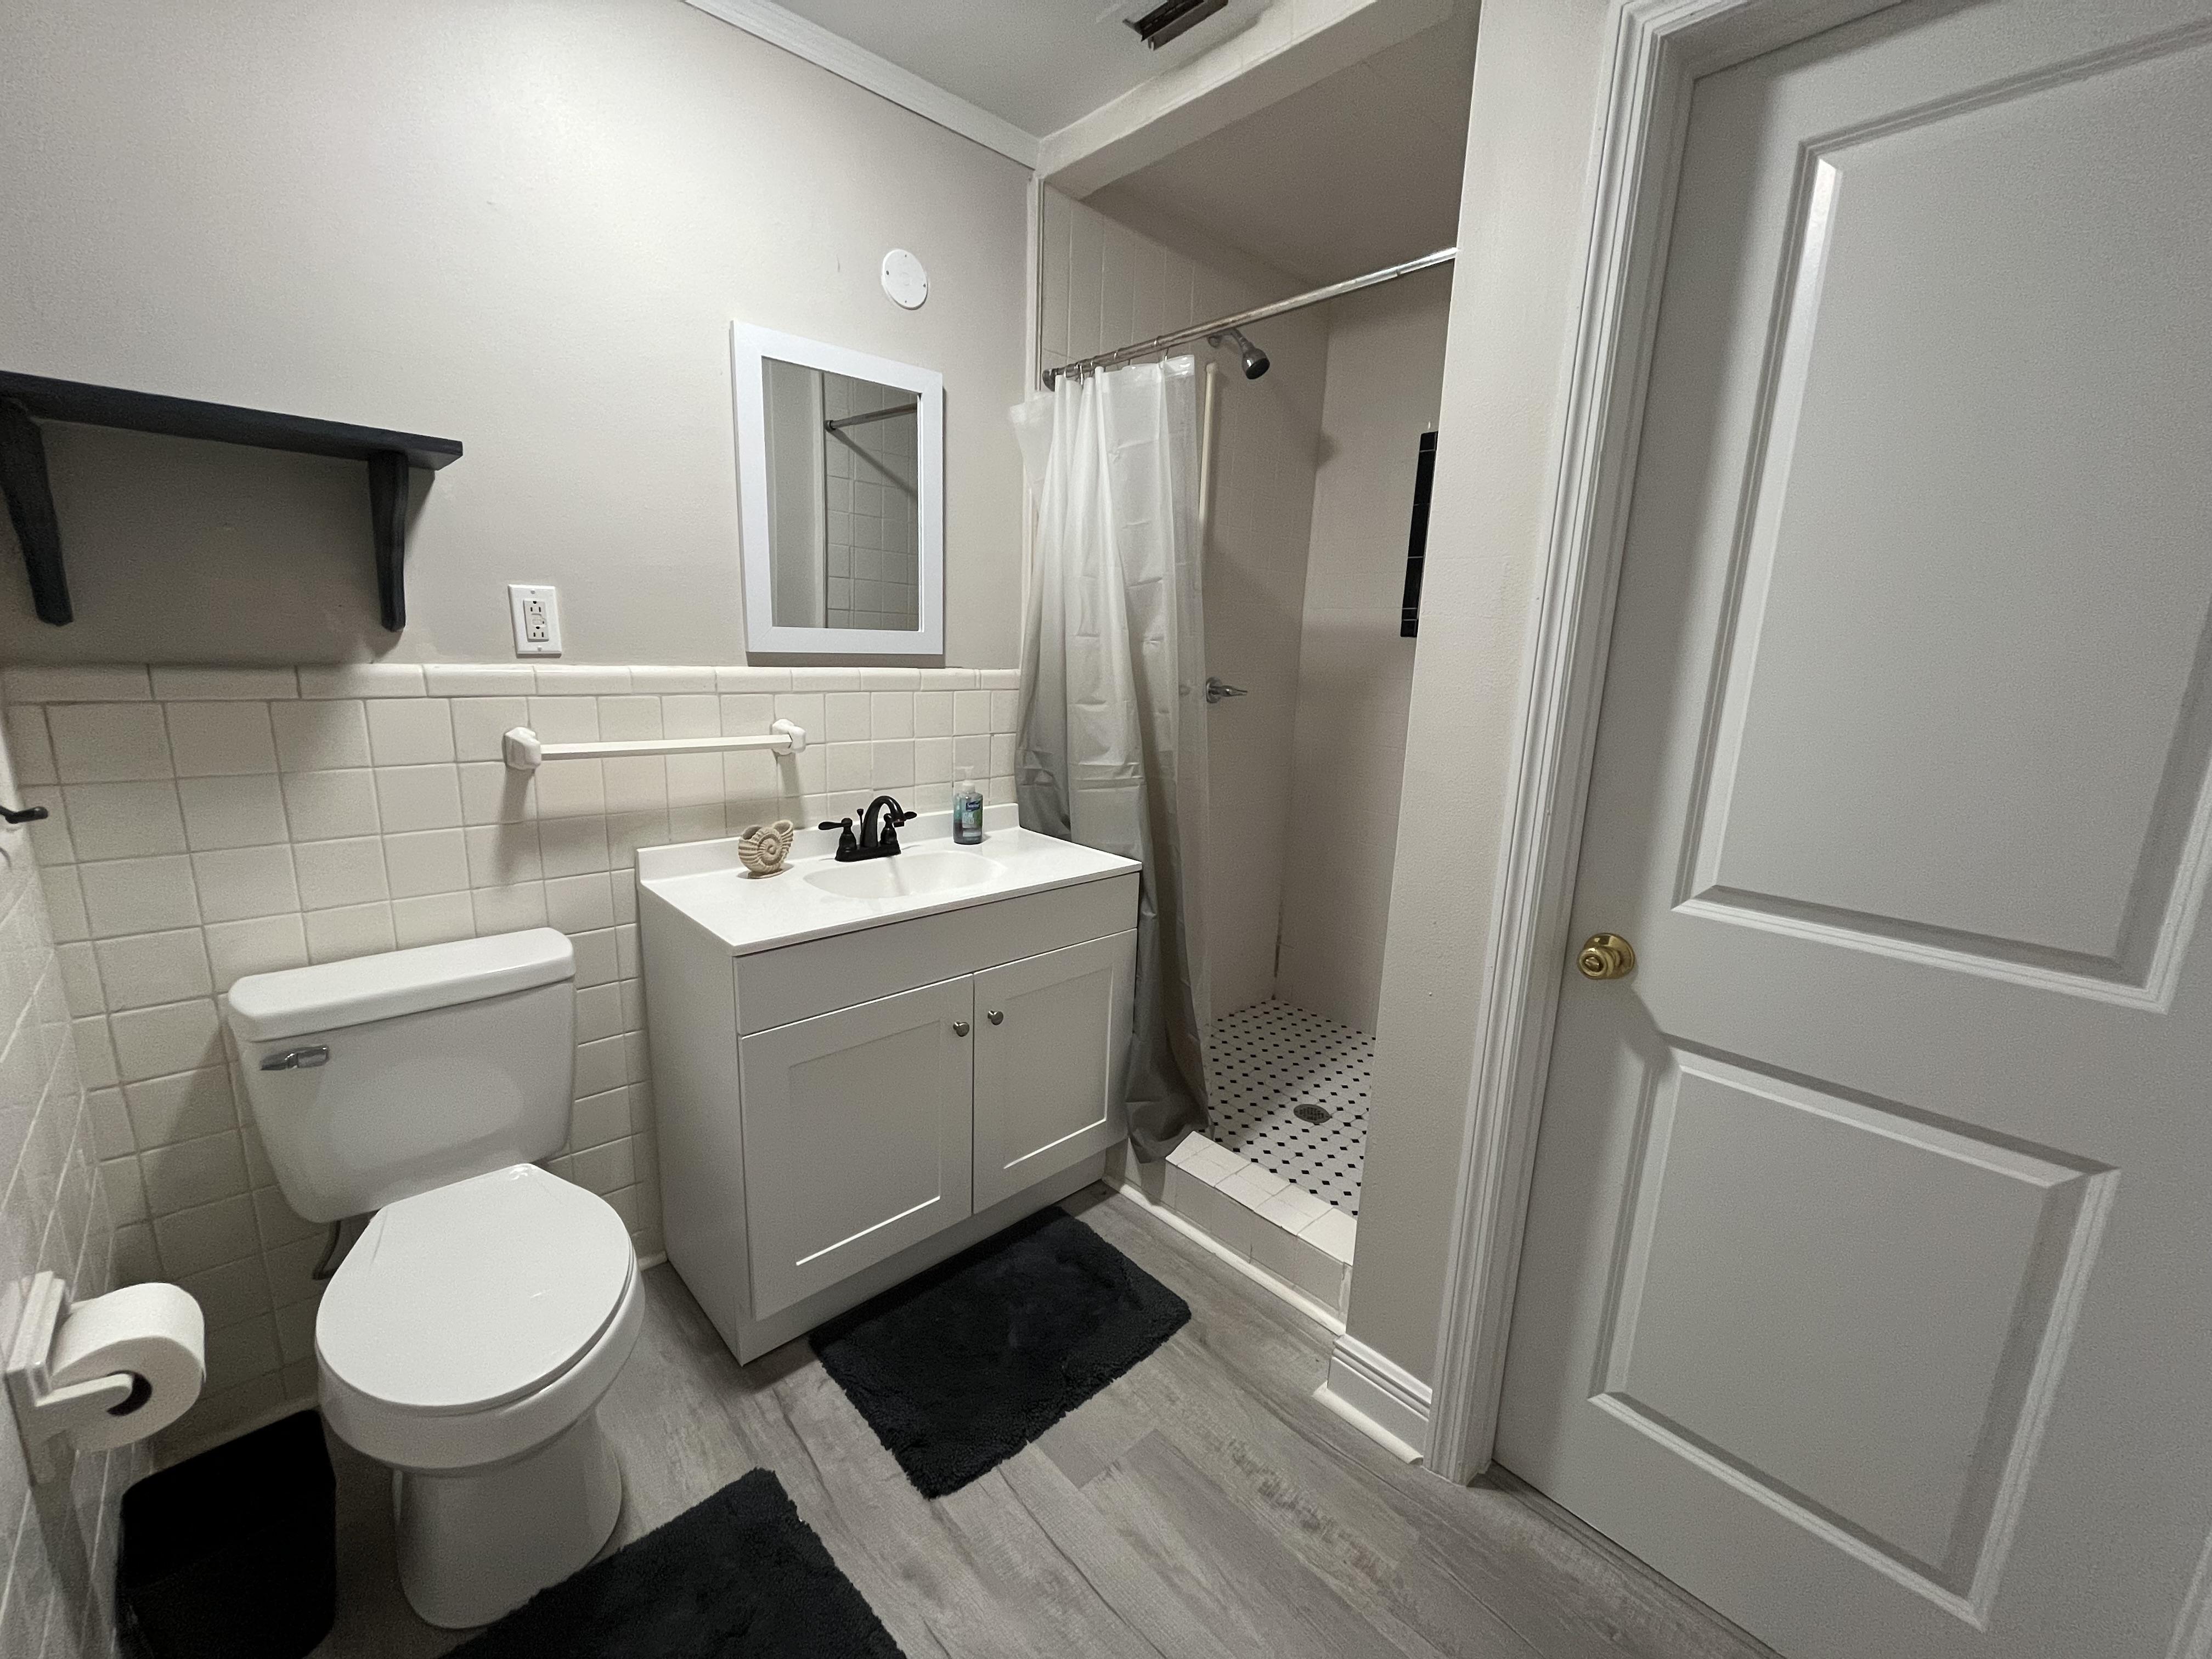 Sparkling clean bathroom with everything new!